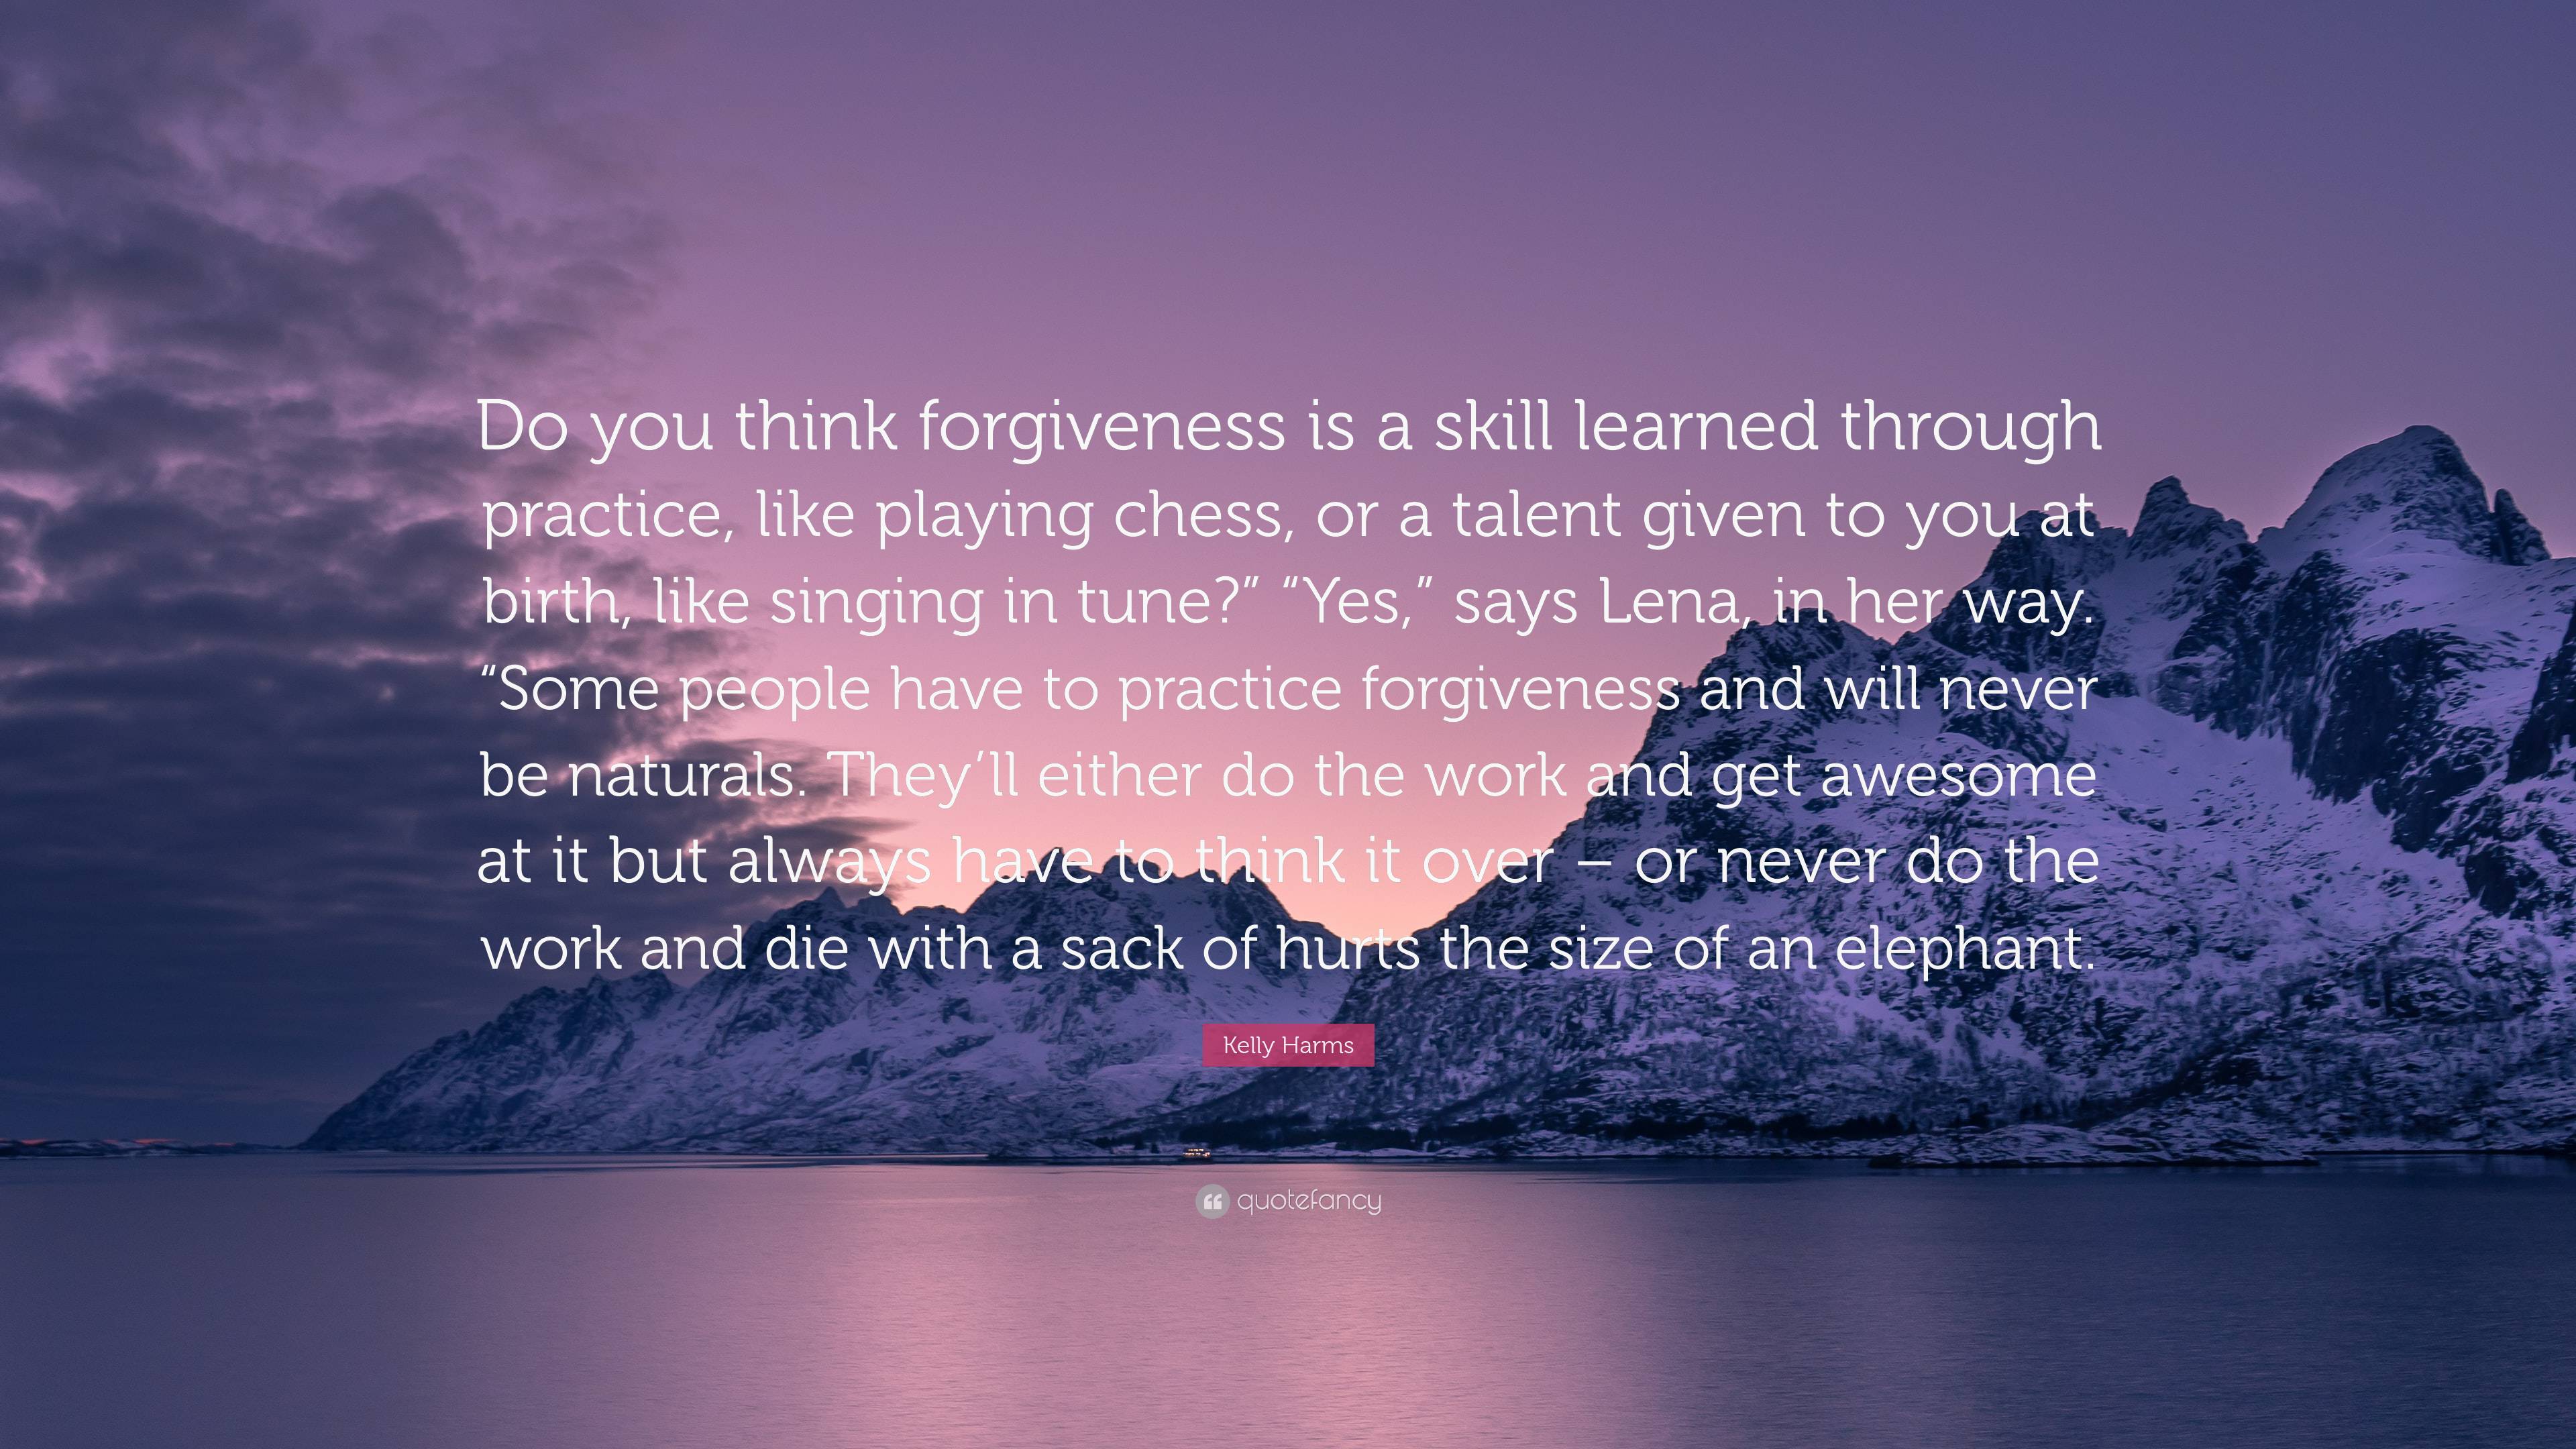 Forgiveness and Chess